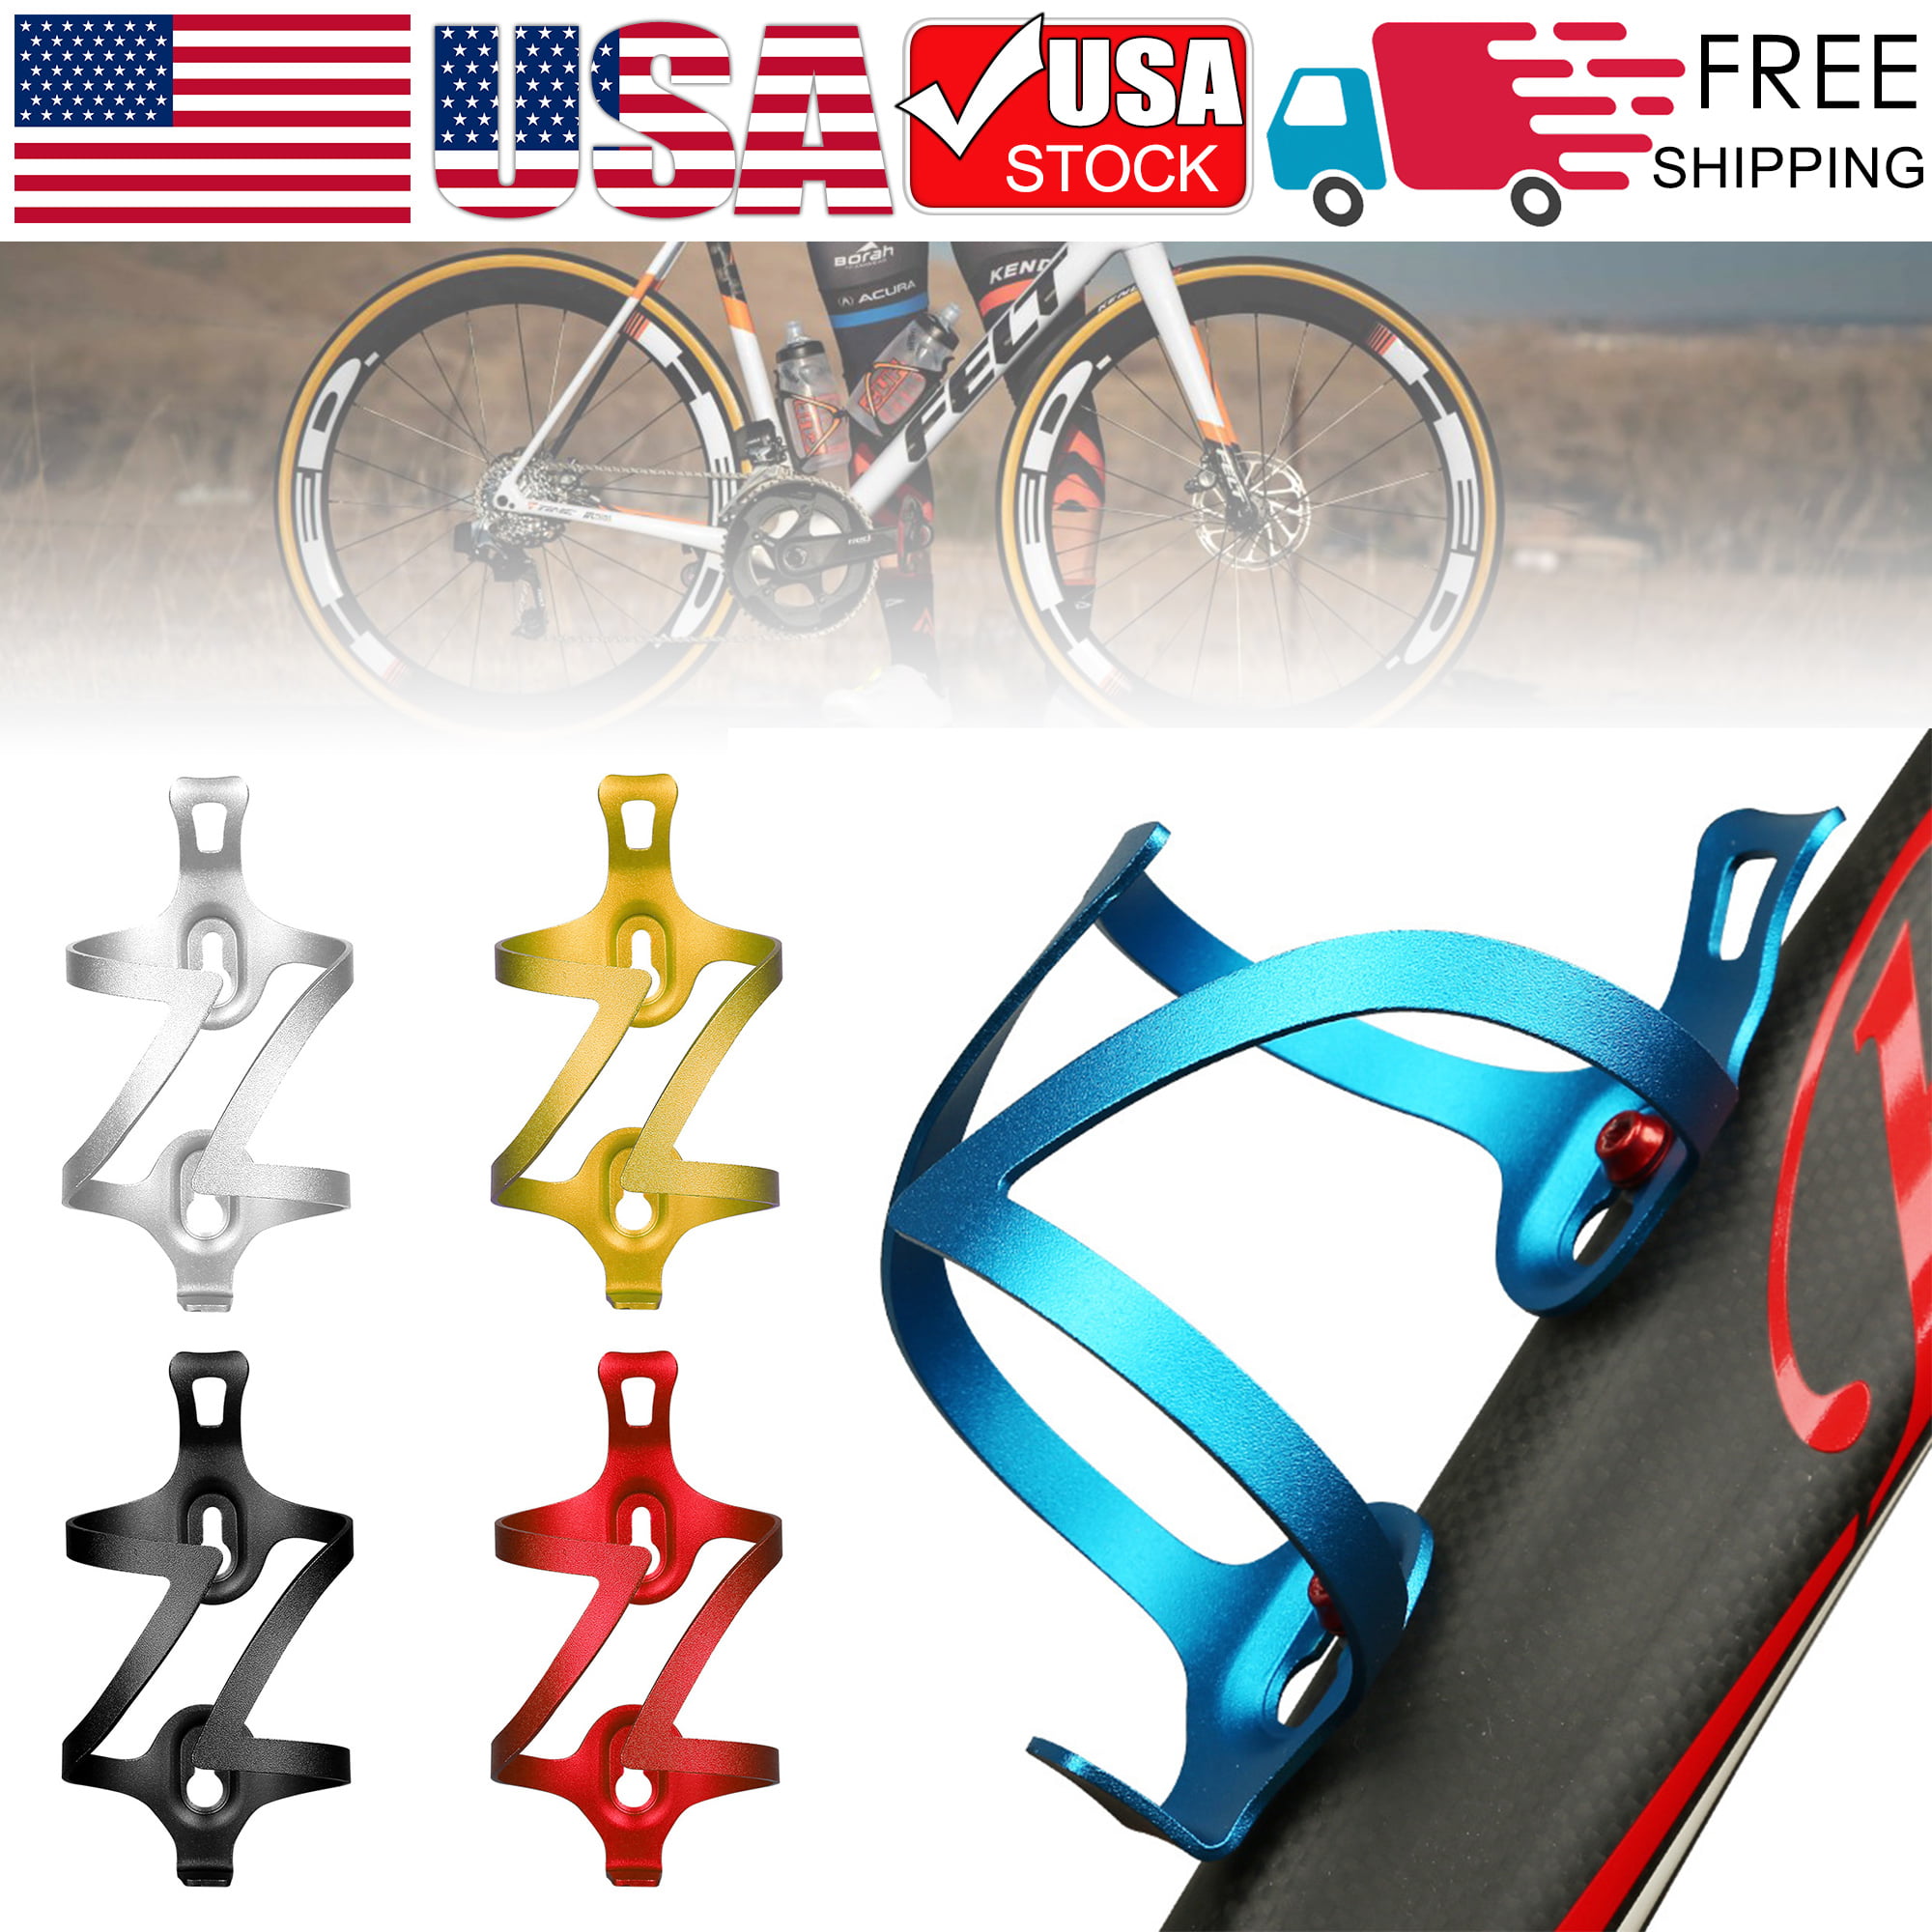 Aluminium Alloy Cycling Bike Water Bottle Holder Bicycle Drink Water Rack Cage X 